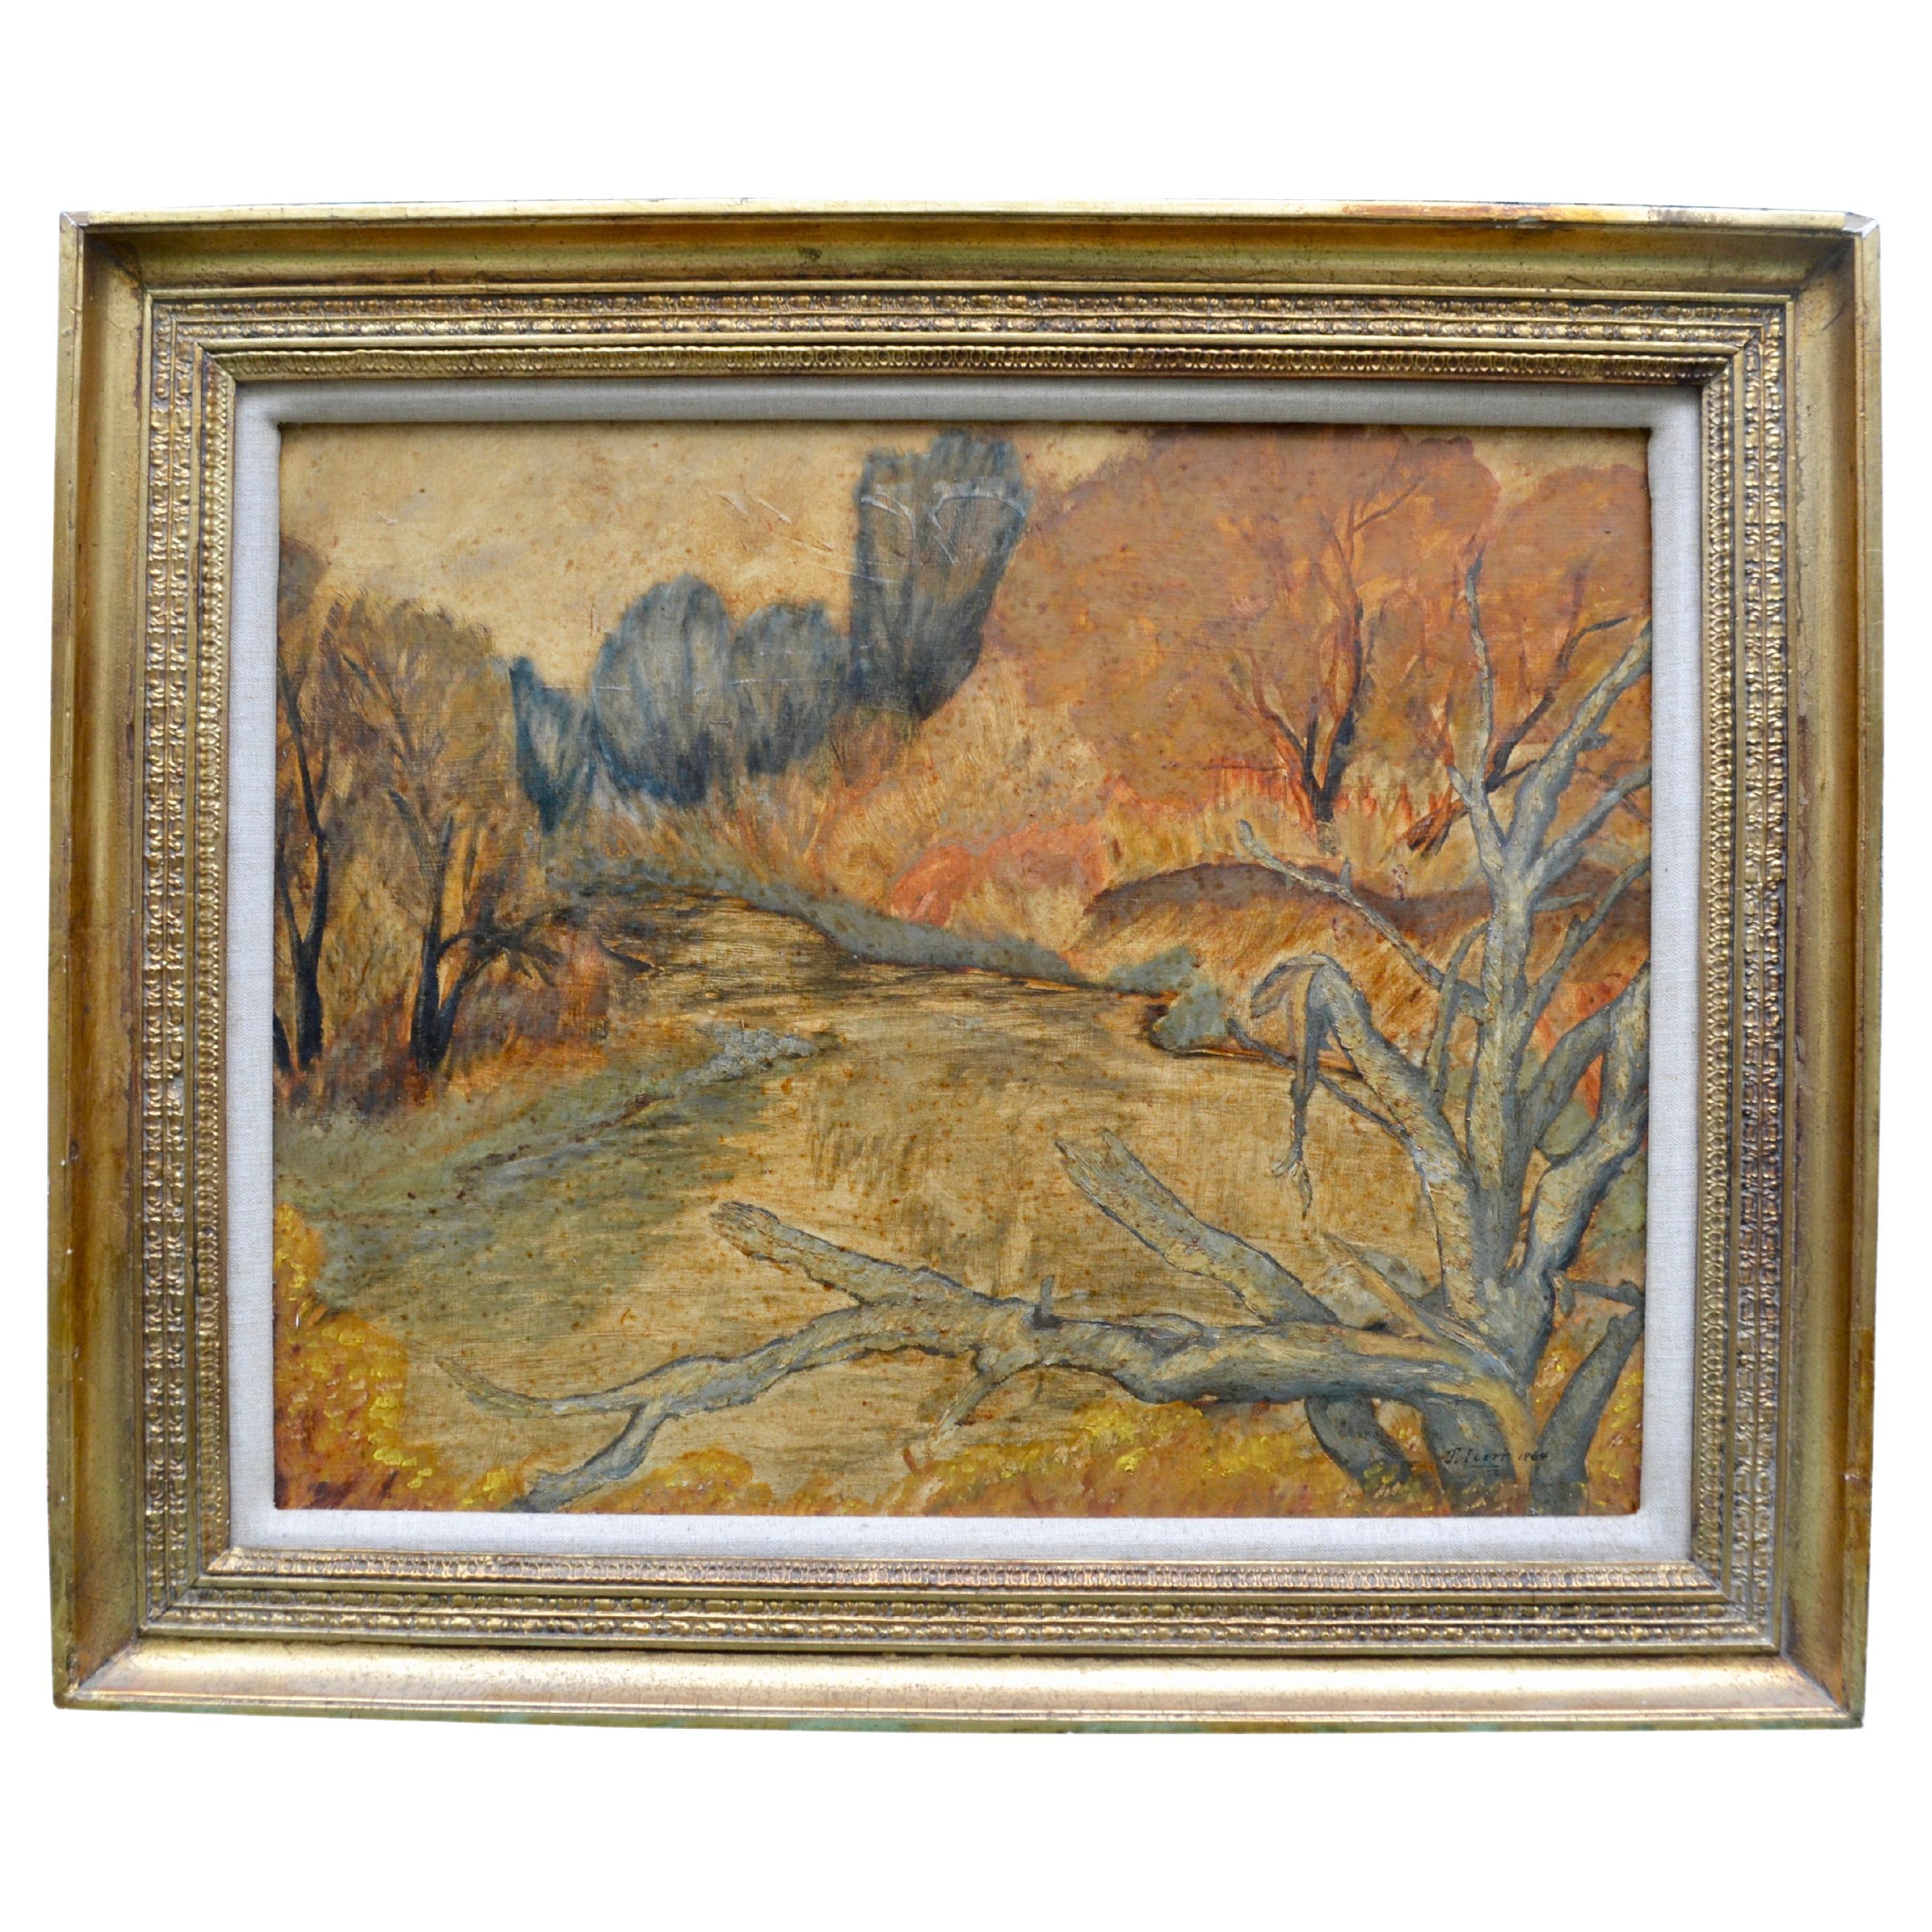 Oil on Board of a Impressionist Painting Southern Ontario Autumn by J. Blett 